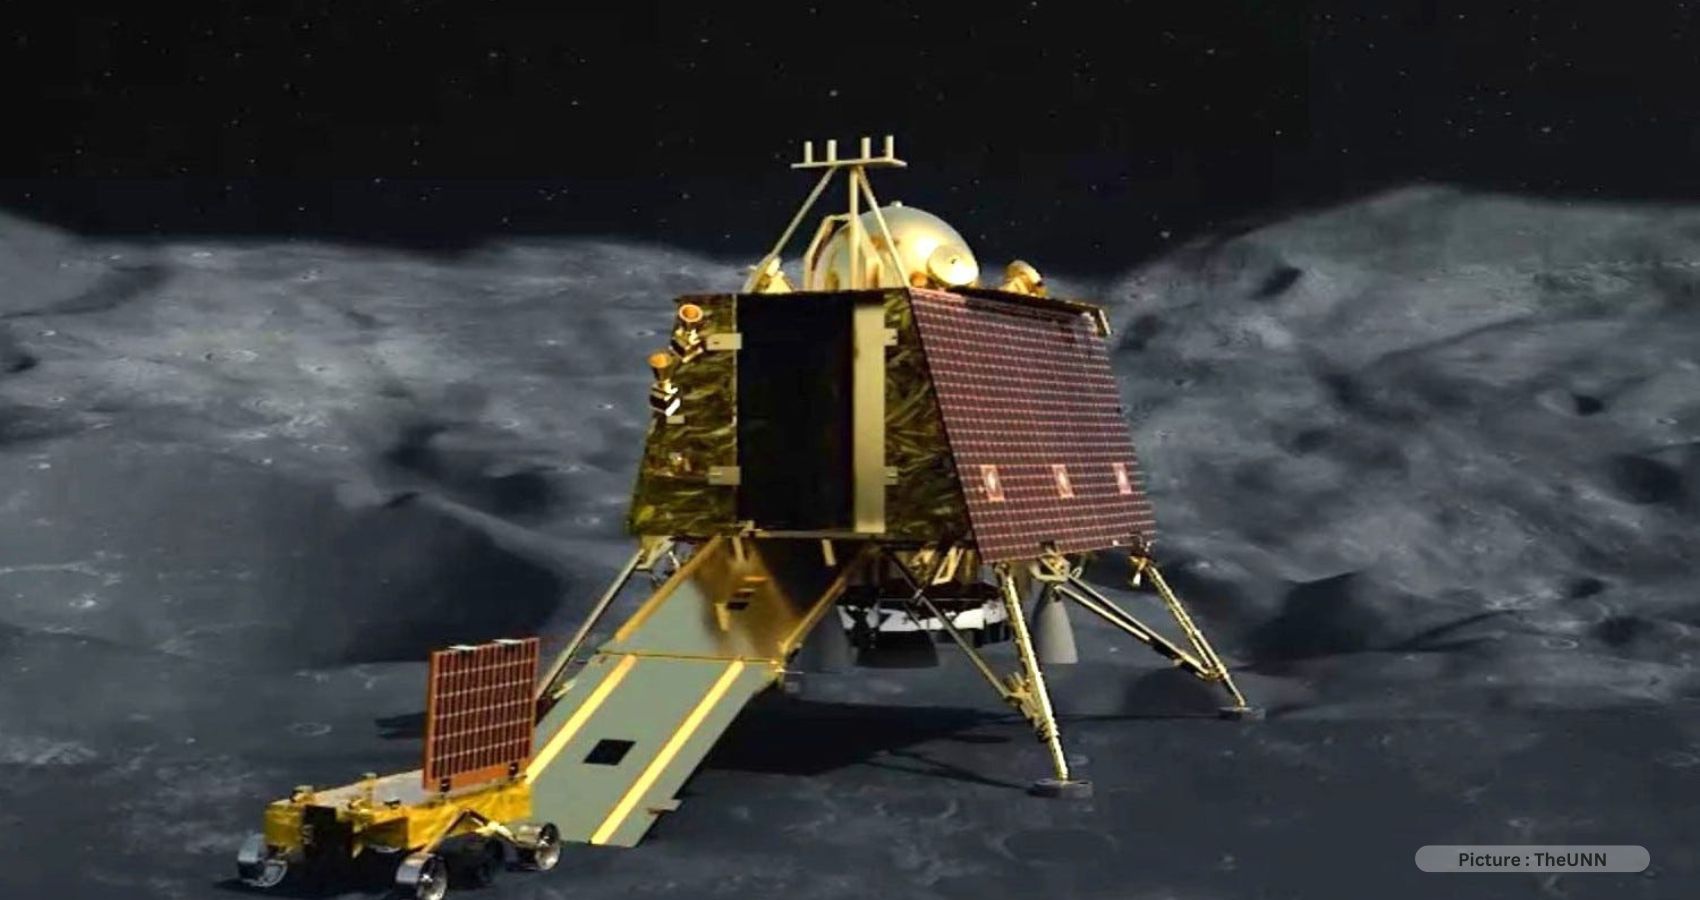 Mission Accomplished, India Puts Moon Rover To ‘Sleep’